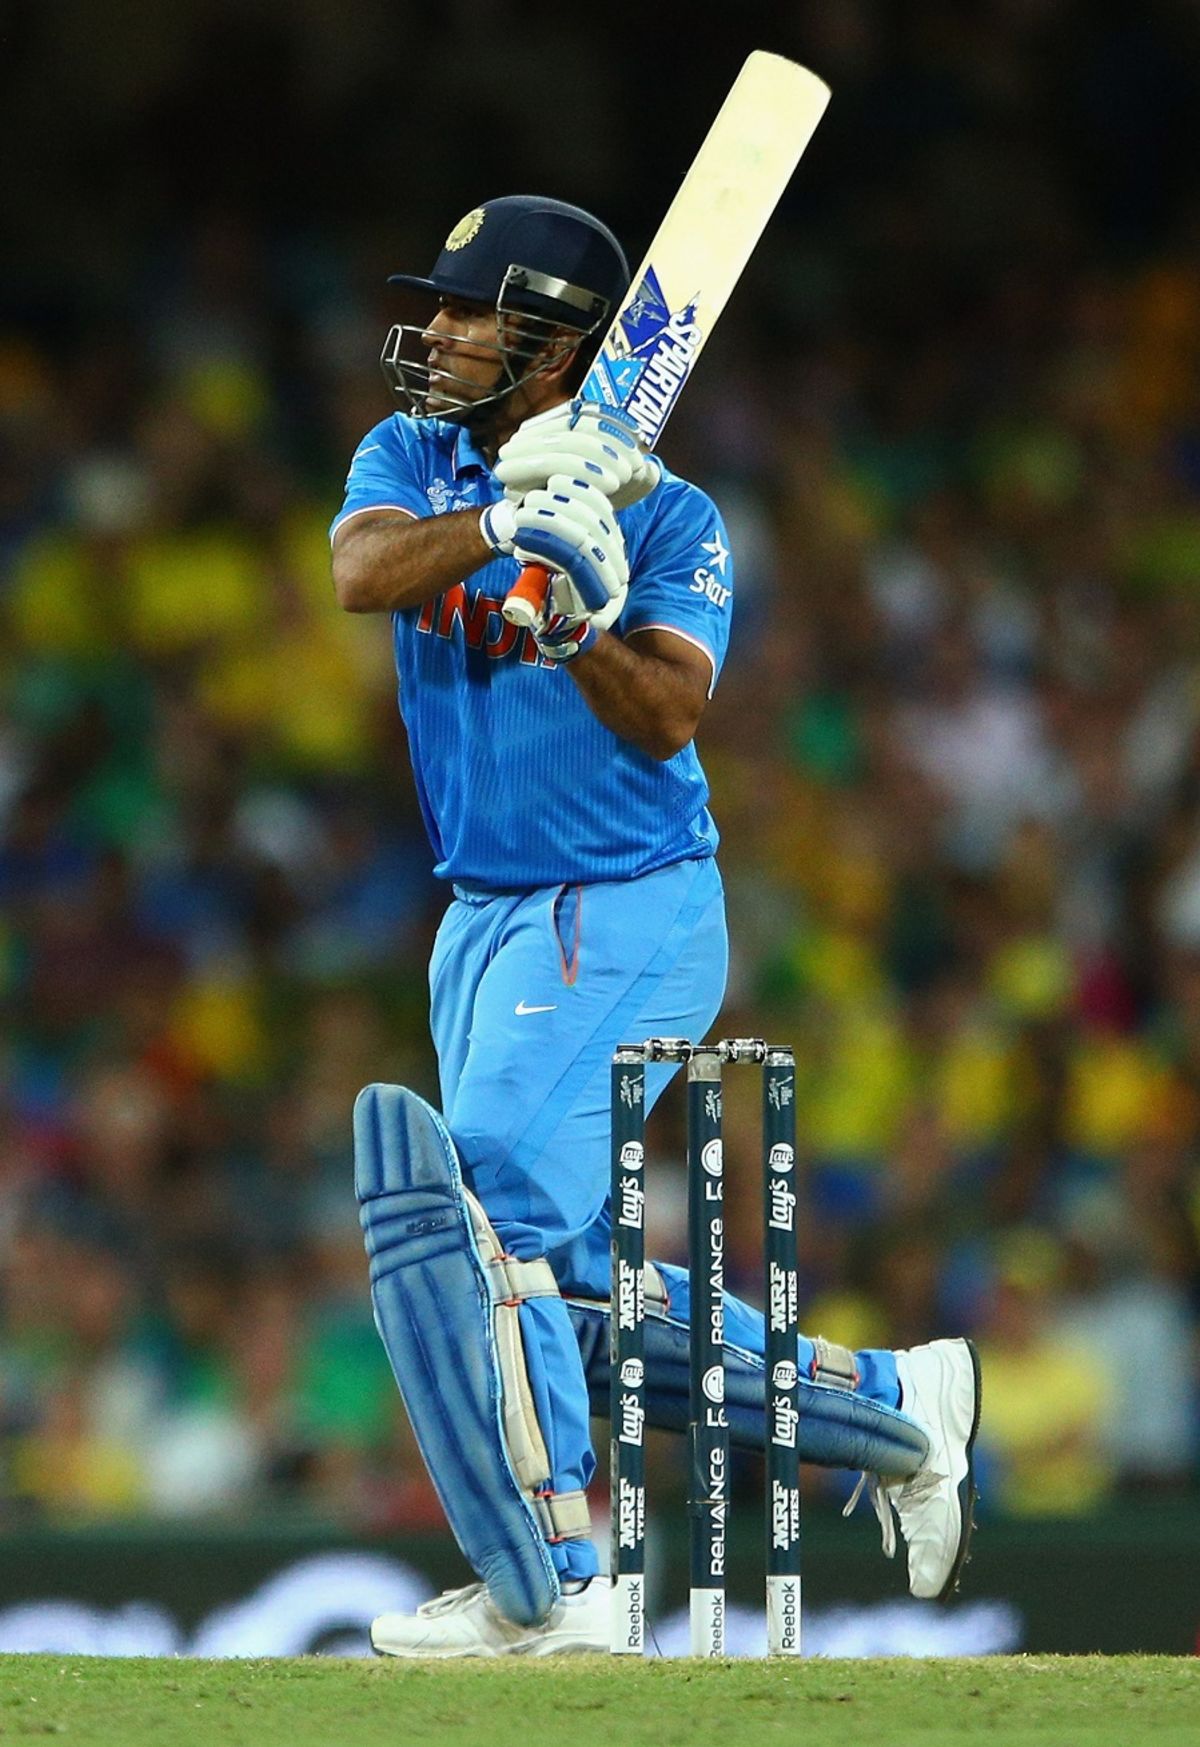 MS Dhoni clatters a pull, Australia v India, World Cup 2015, 2nd semi-final, Sydney, March 26, 2015